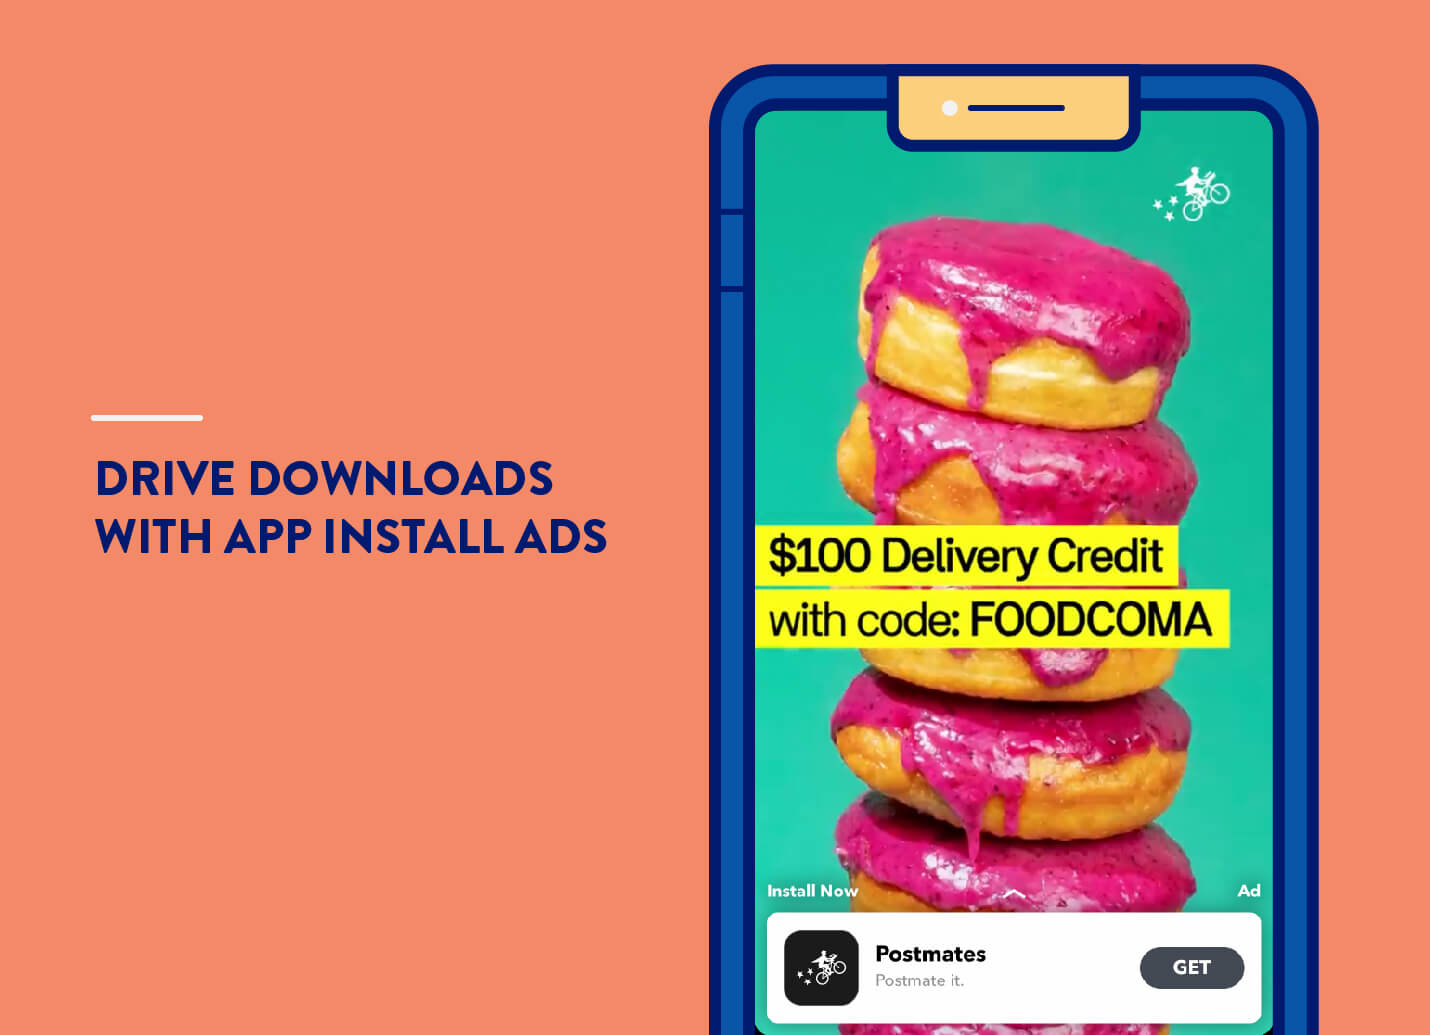 app install ads example from Postmates on snapchat for mobile app marketing strategies